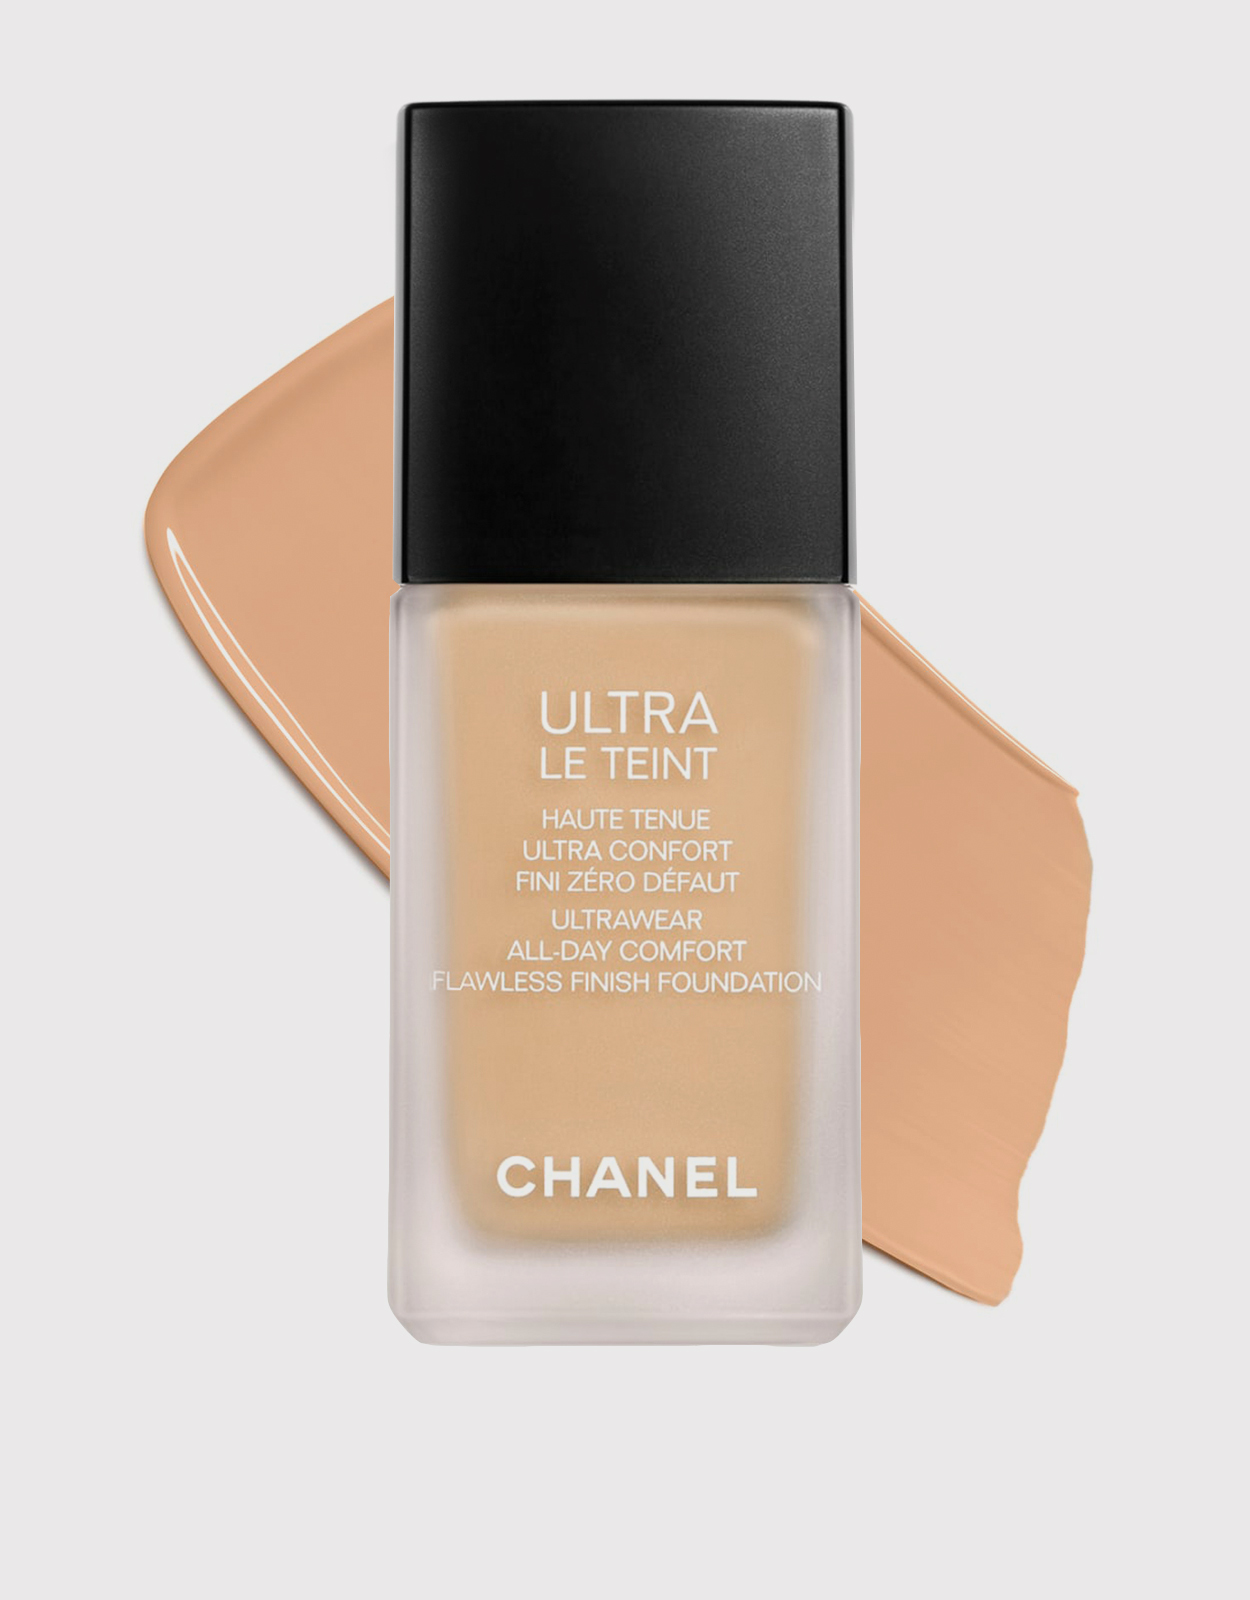 Chanel Beauty Ultra Le Teint Ultrawear Comfort Flawless Finish Foundation-BD31 (Makeup,Face,Foundation) IFCHIC.COM